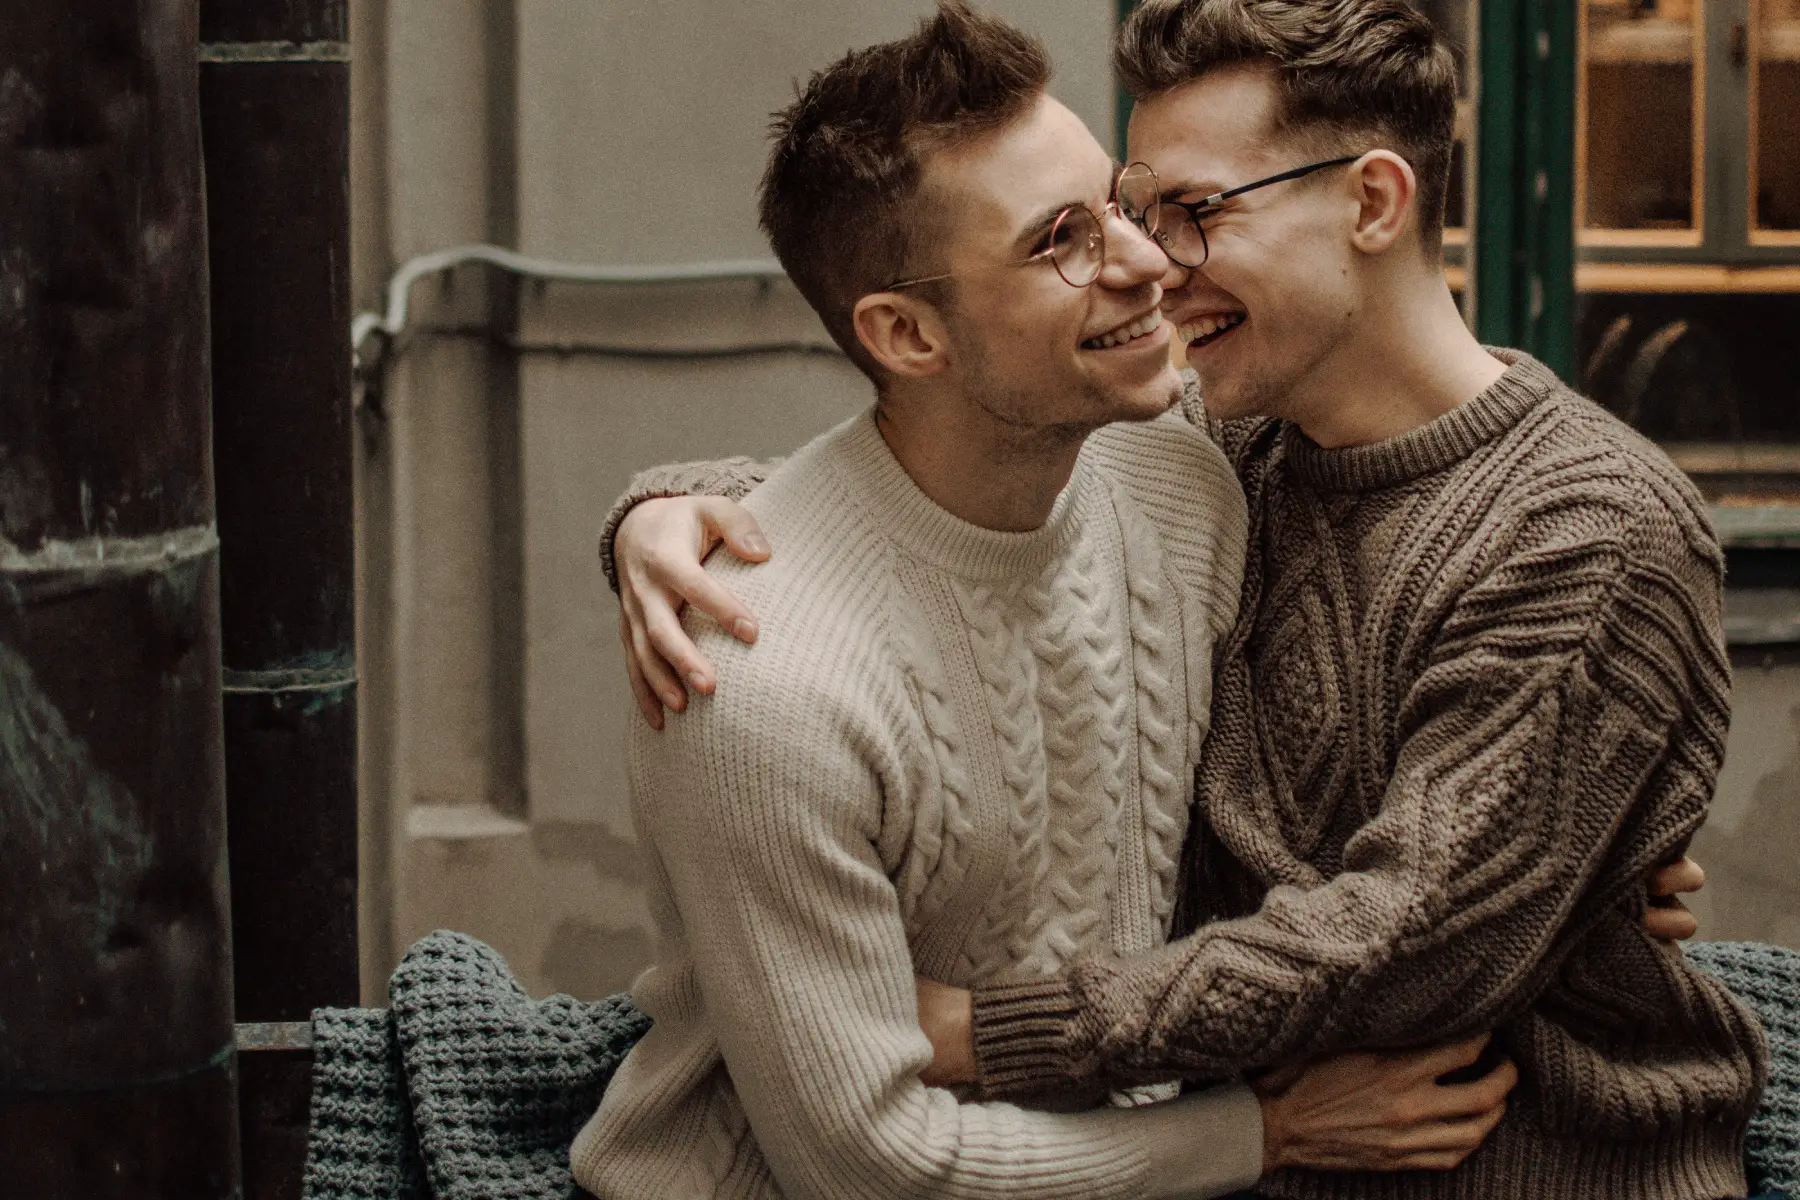 Two men embracing affectionately outside a building with a window